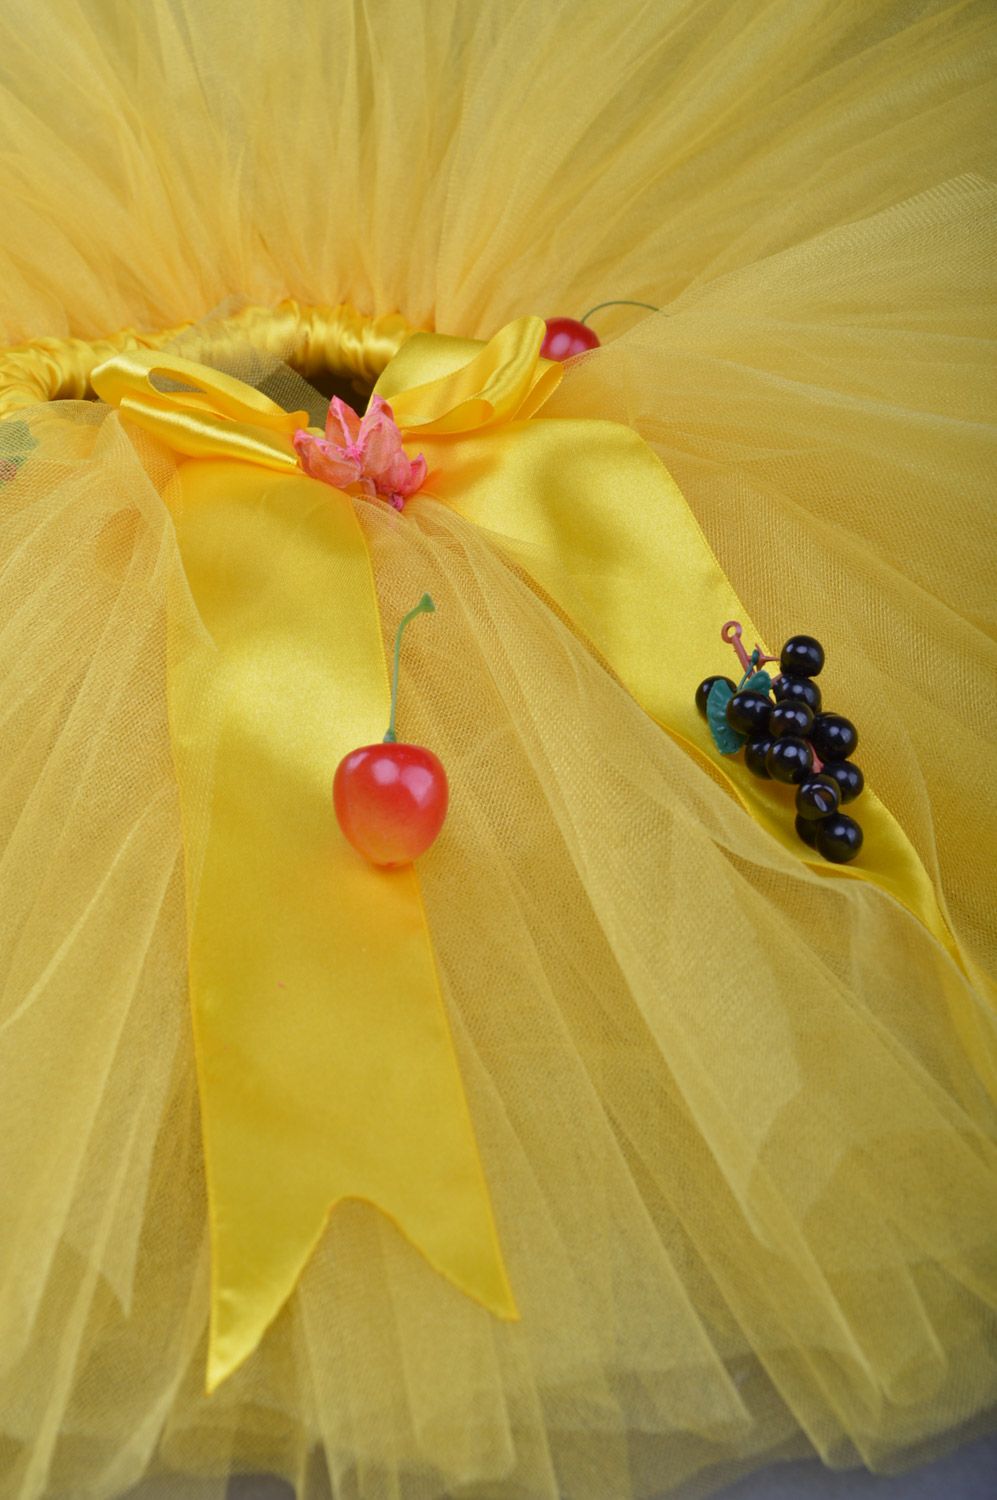 Handmade ballet tutu skirt sewn of bright yellow tulle and ribbons for children photo 2